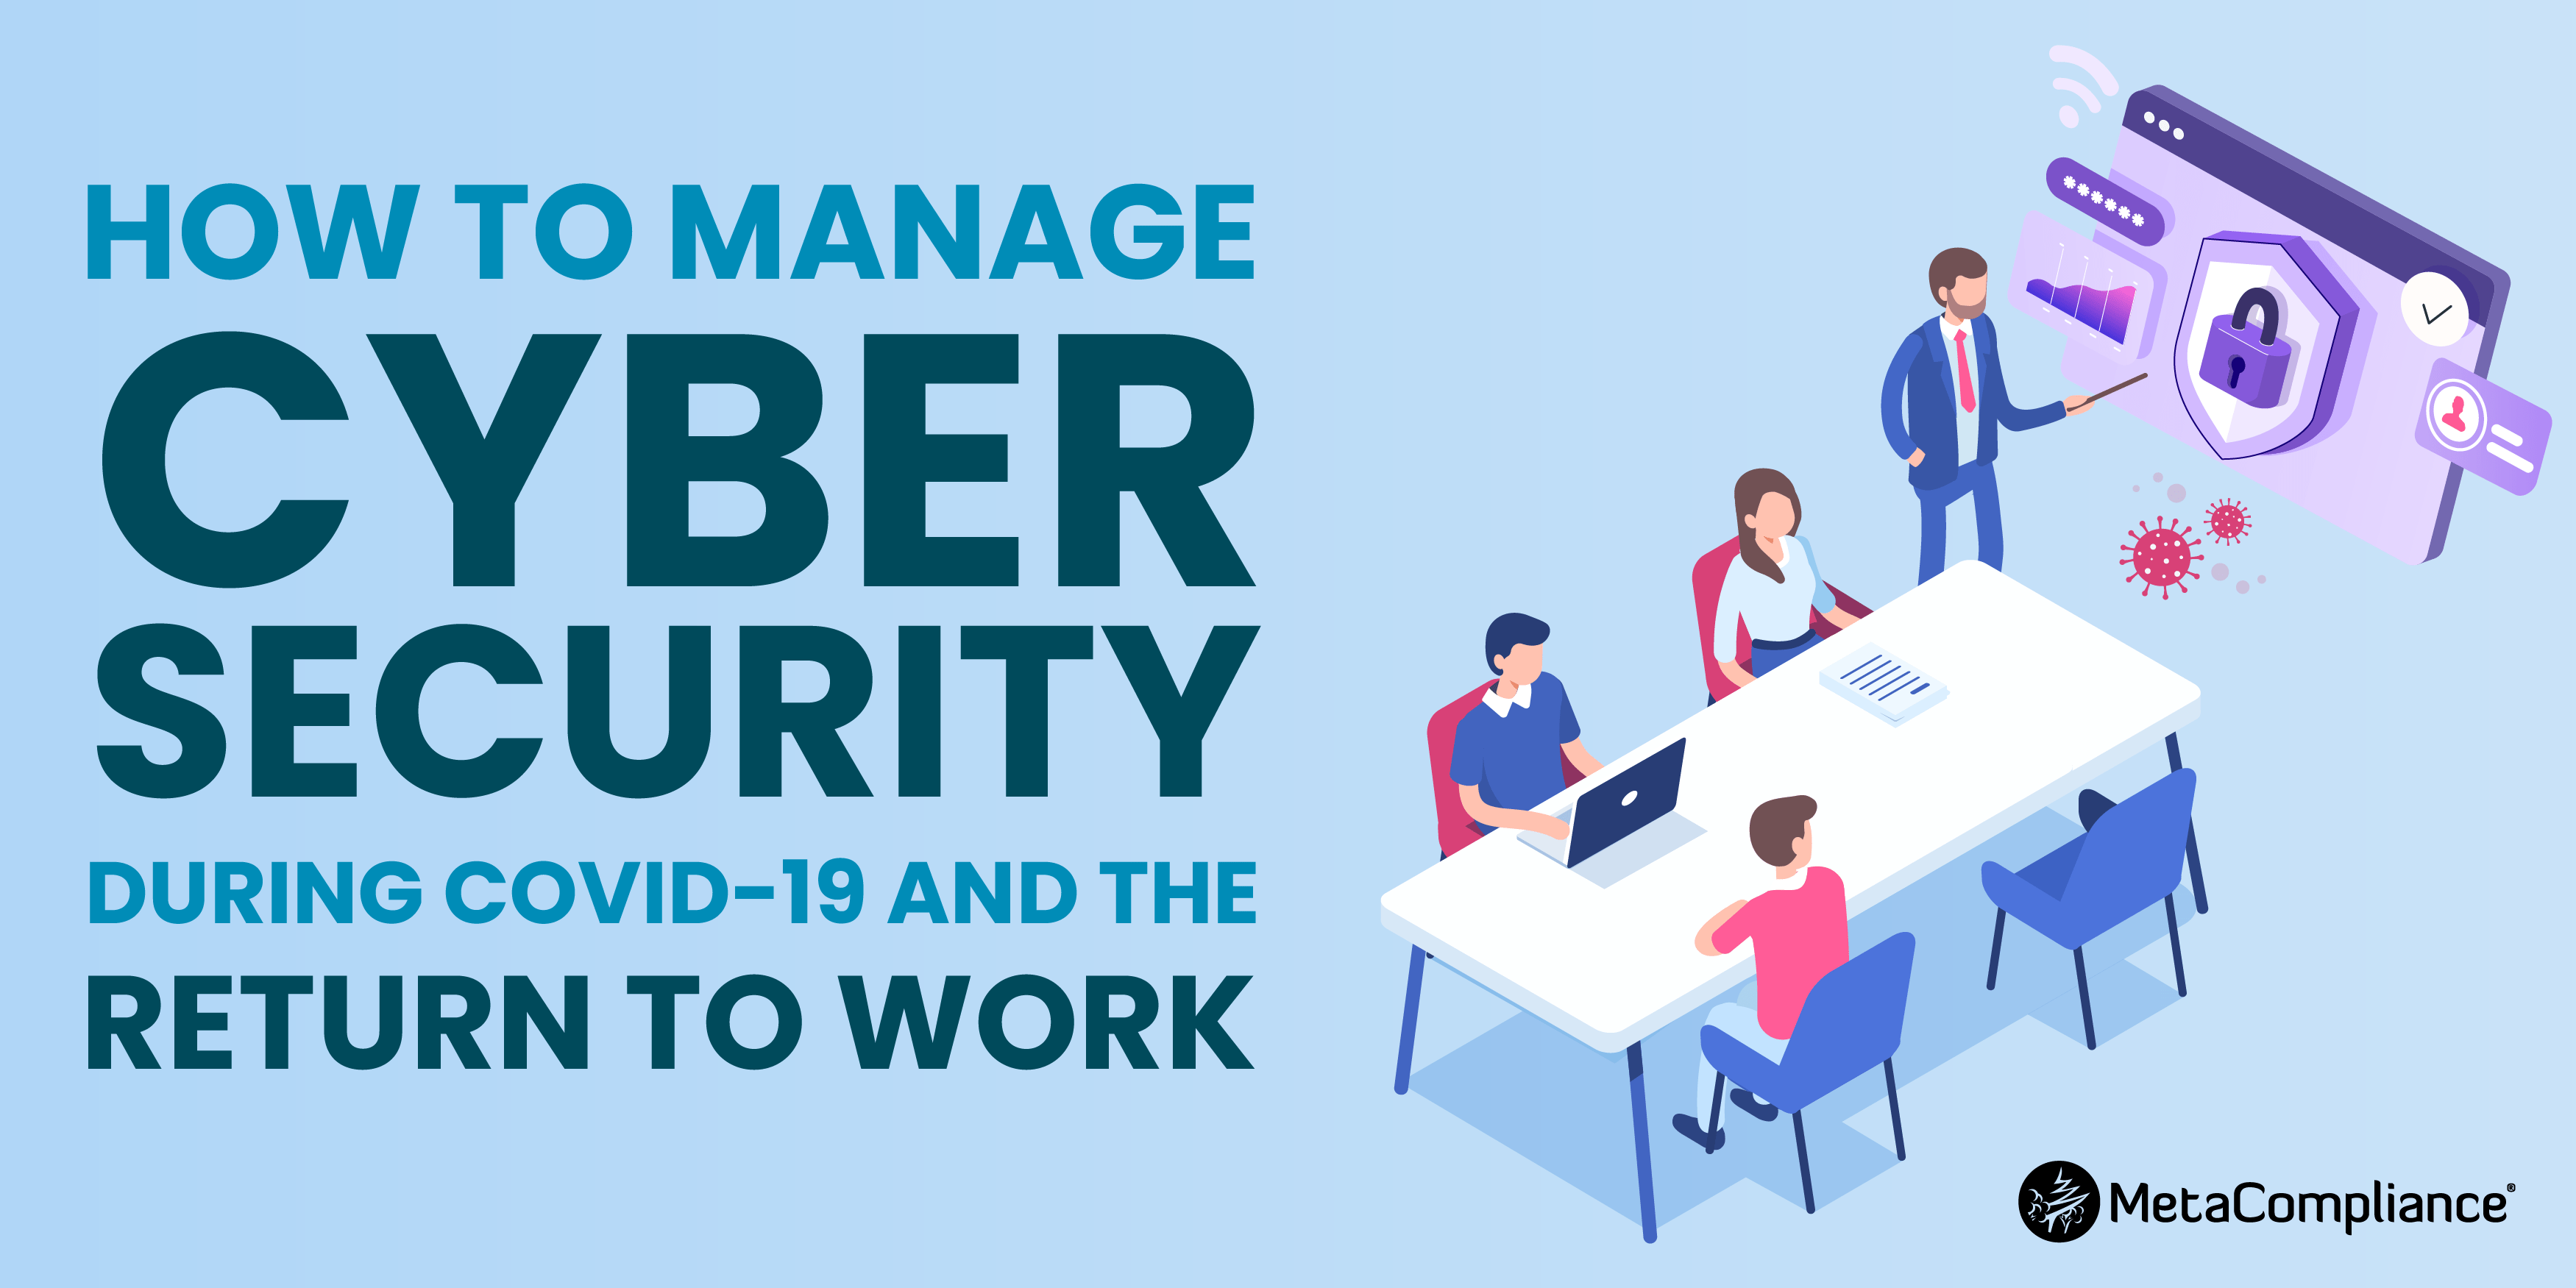 How to Manage Cyber Security during COVID-19 and the Return to Work